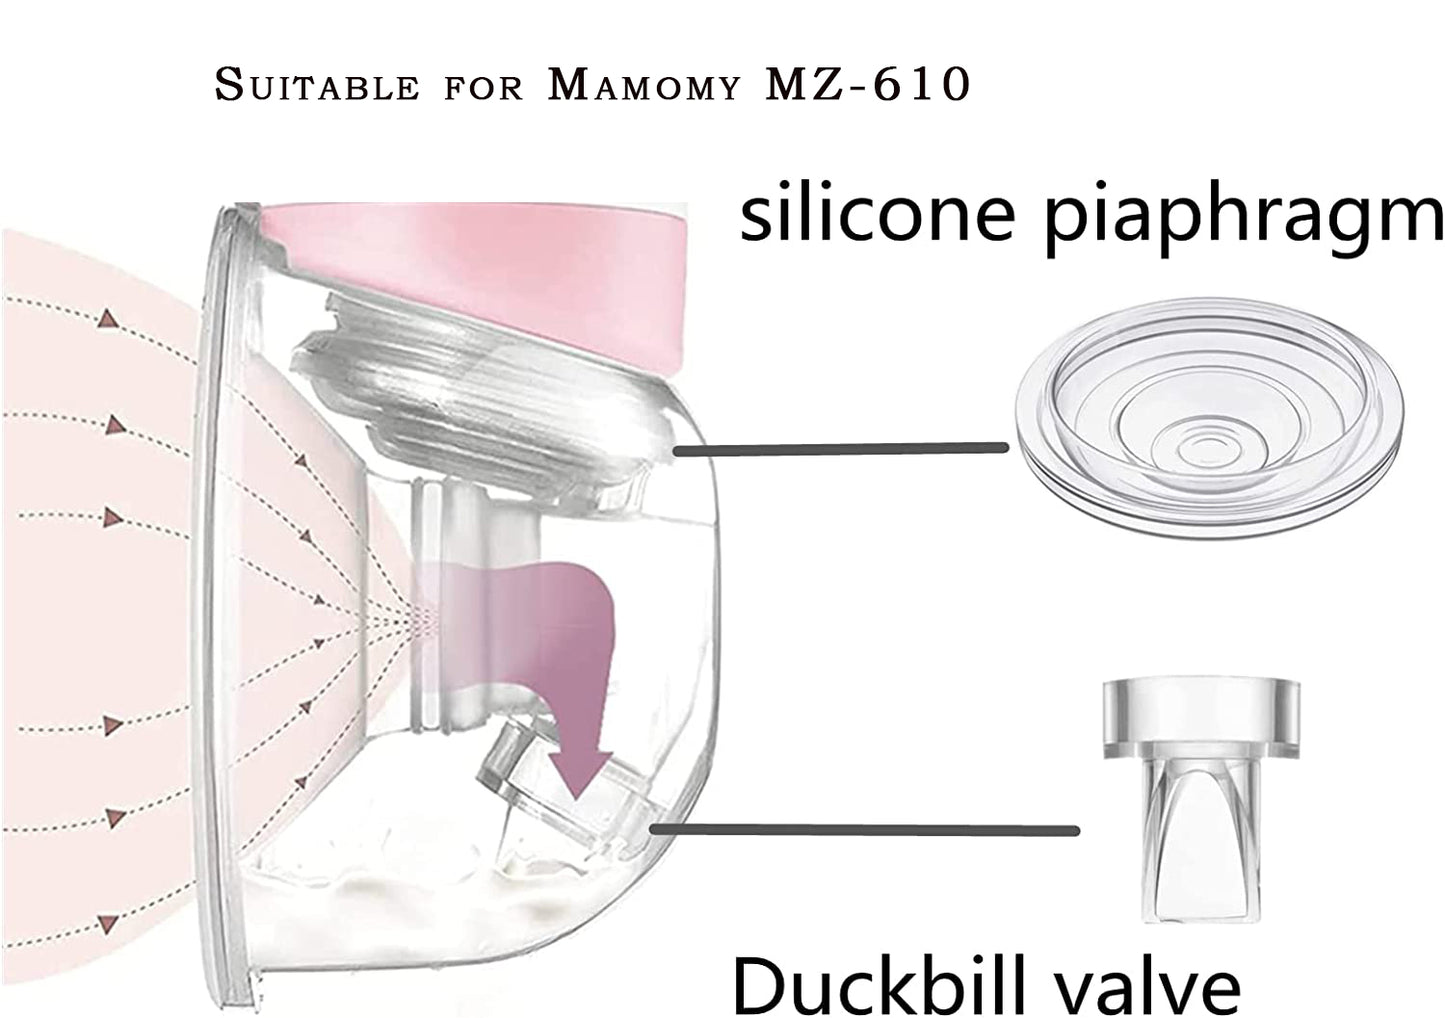 Mamomy Valves & Silicone Diaphragm for MZ-610/611,Wearable Breast Pump Universal Duckbill Valve and Silicone Diaphragm Accessories